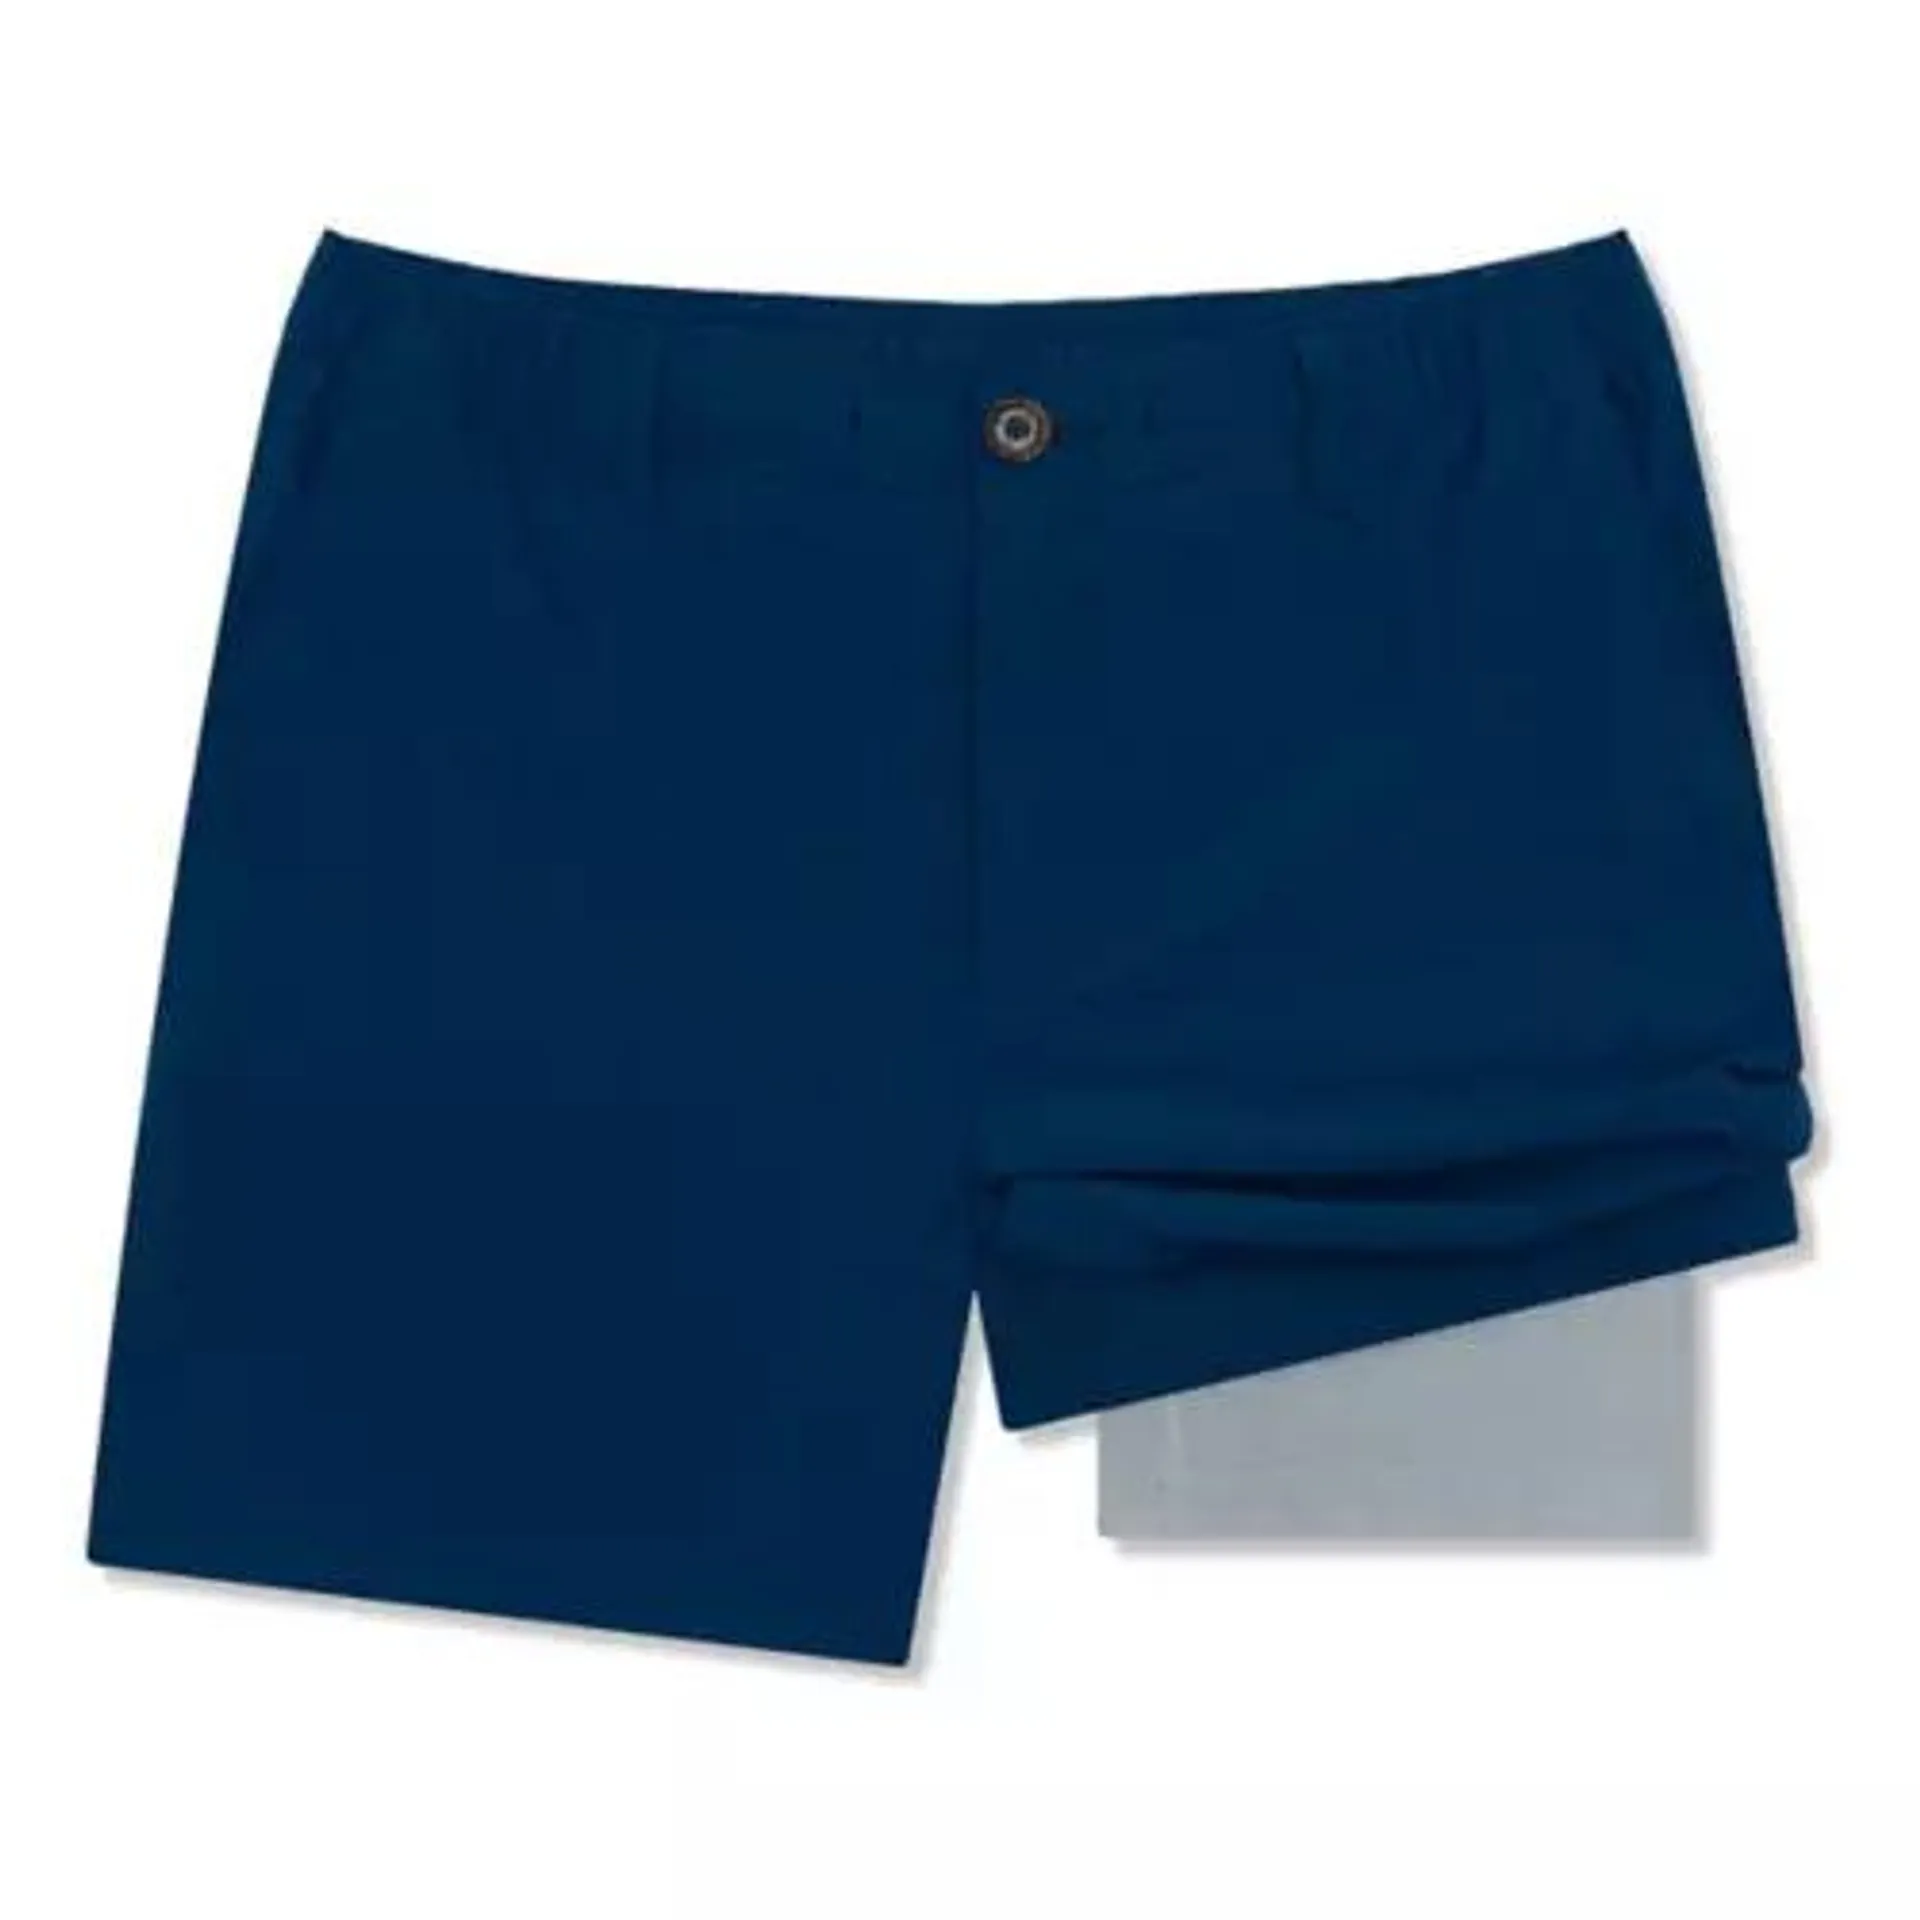 Men's Chubbies Lined Everywear Performance Shorts